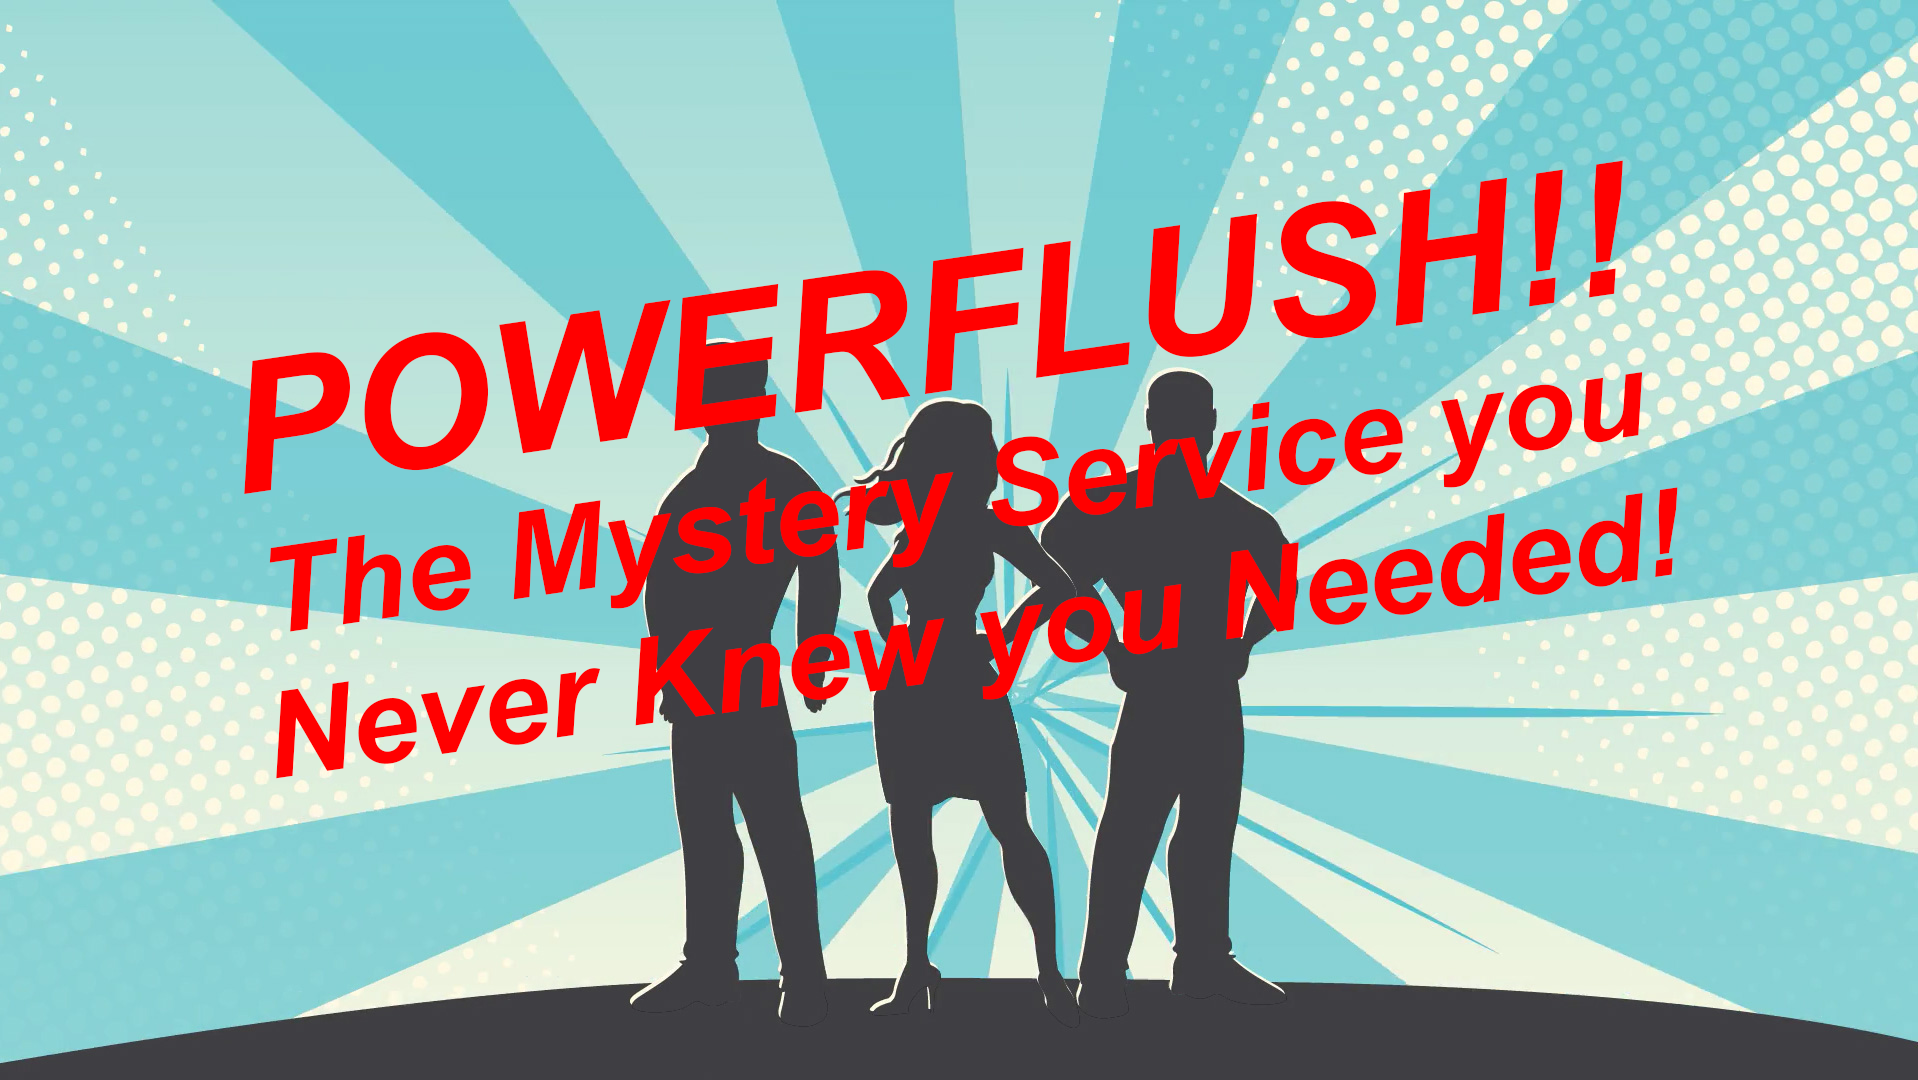 Powerflush – the mystery service you never knew you needed!